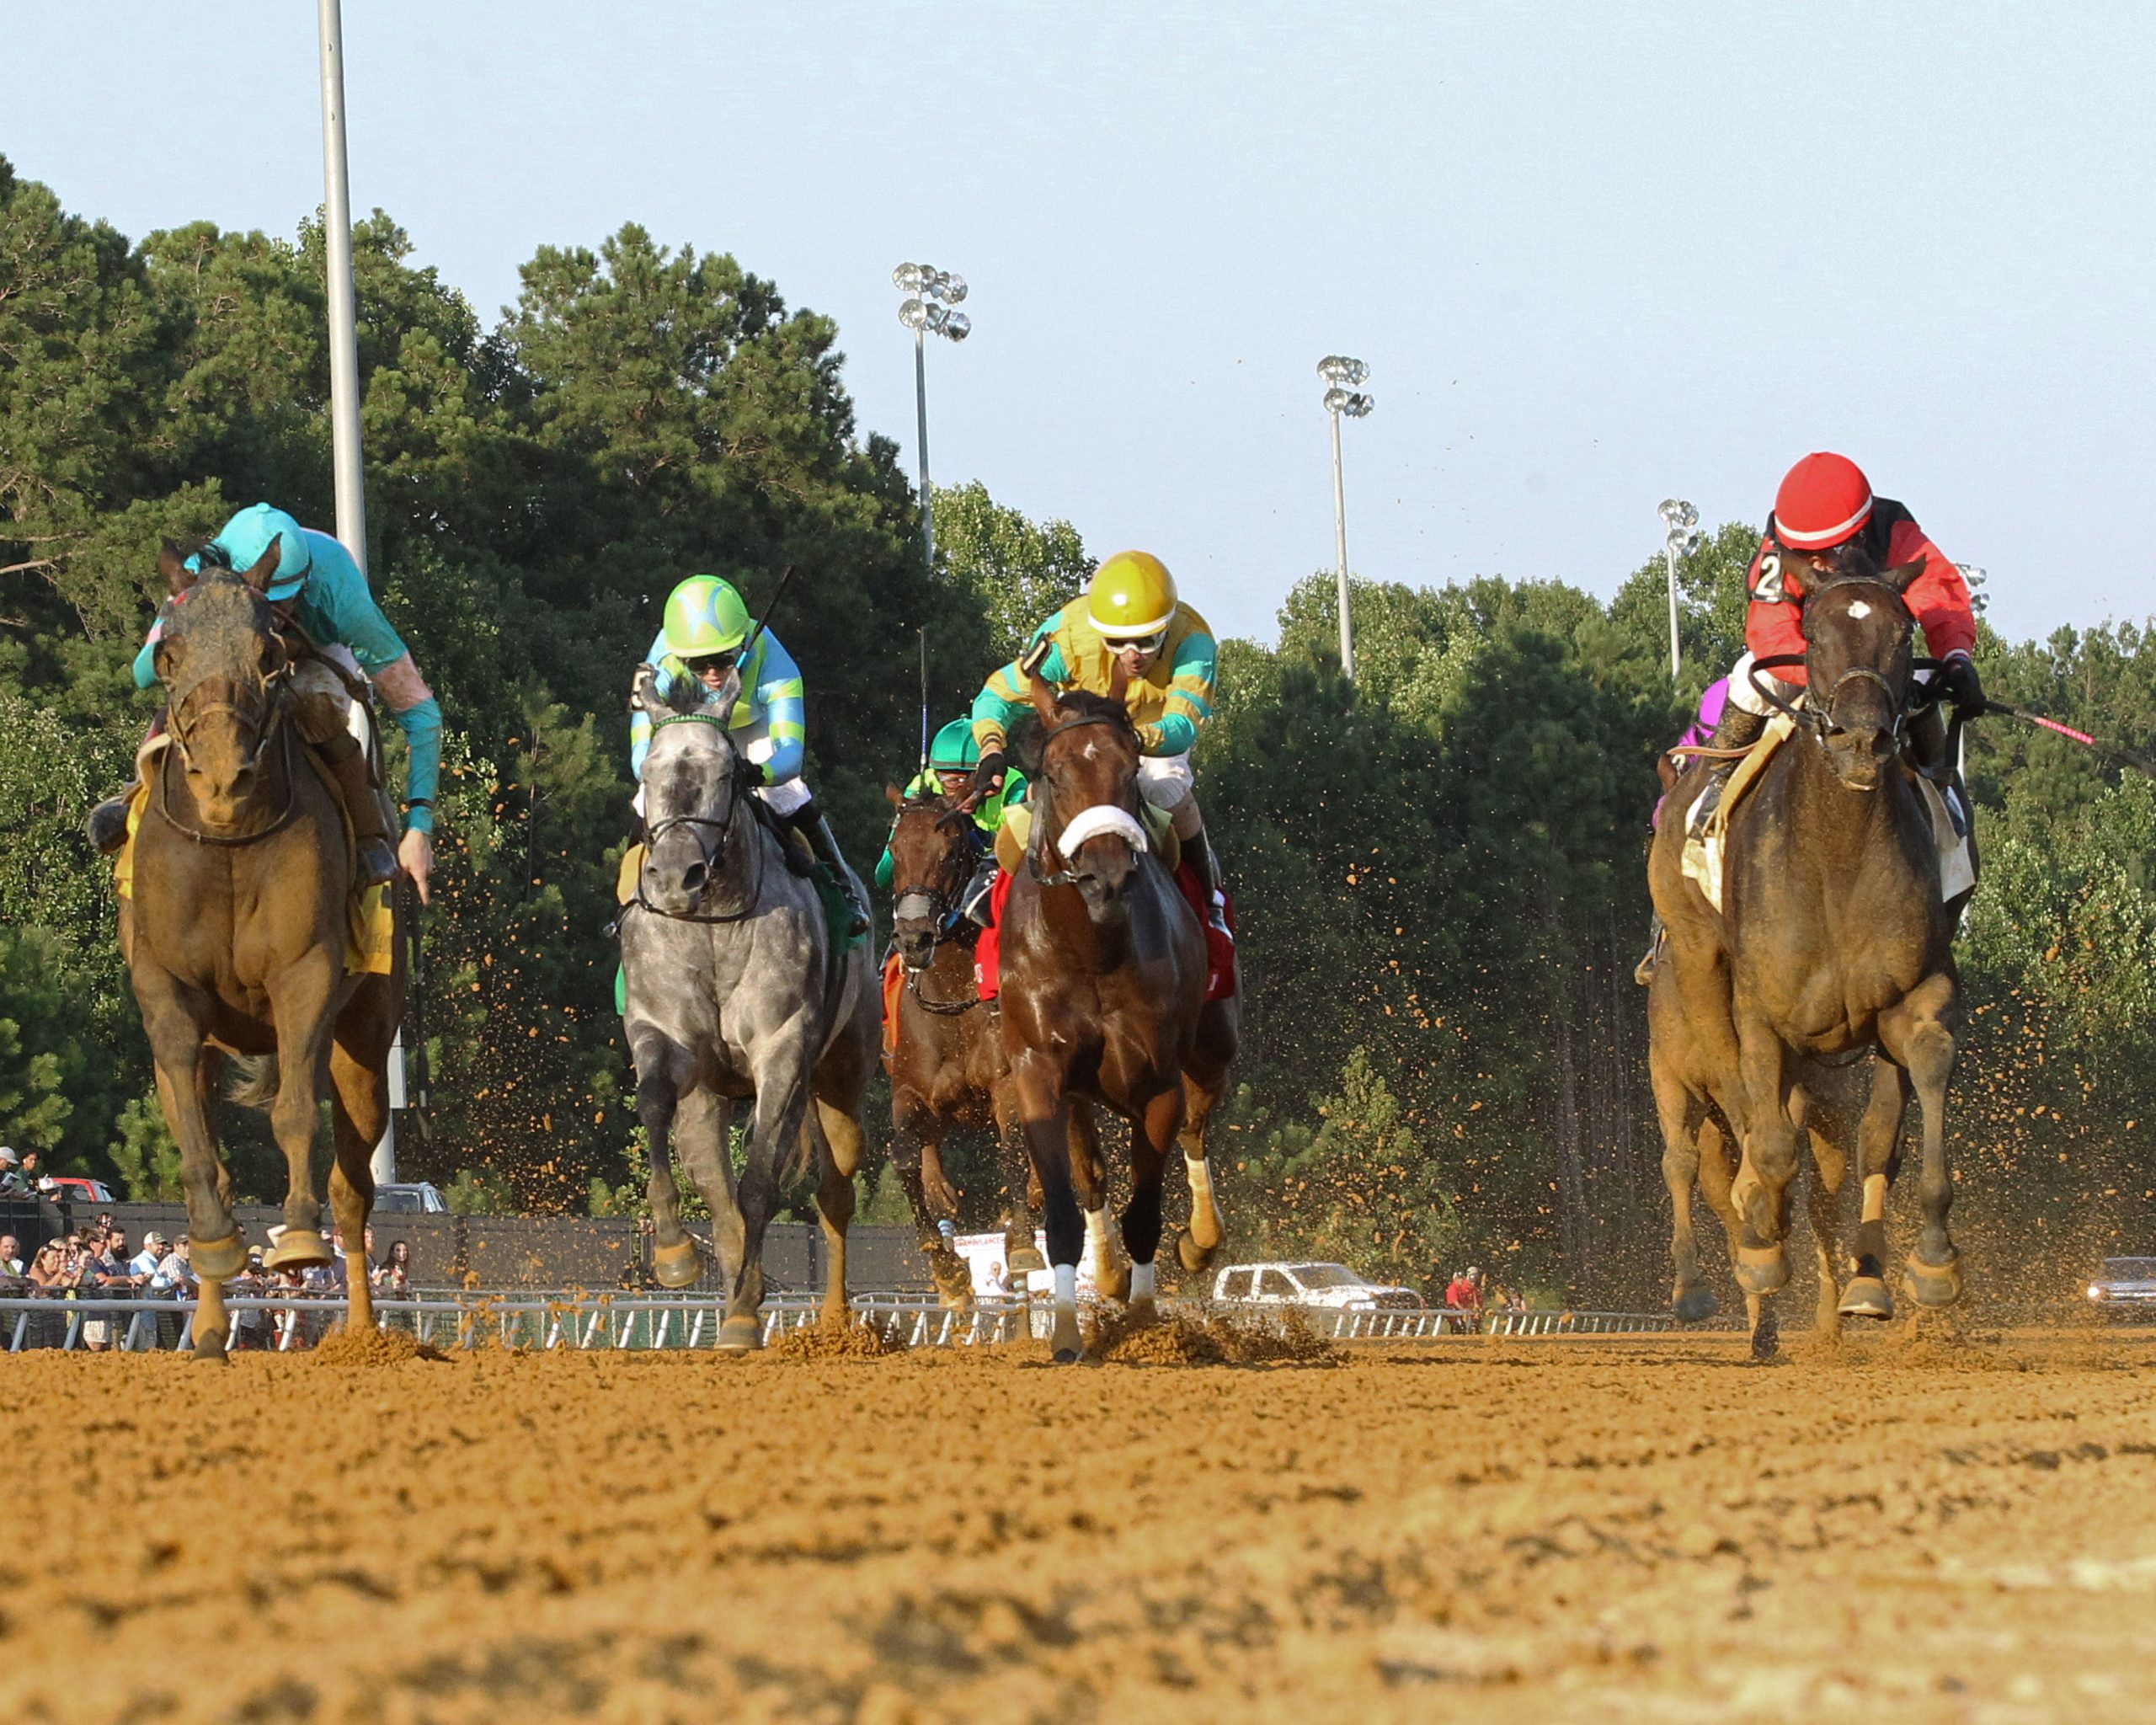 Live Racing at Colonial Downs in New Kent